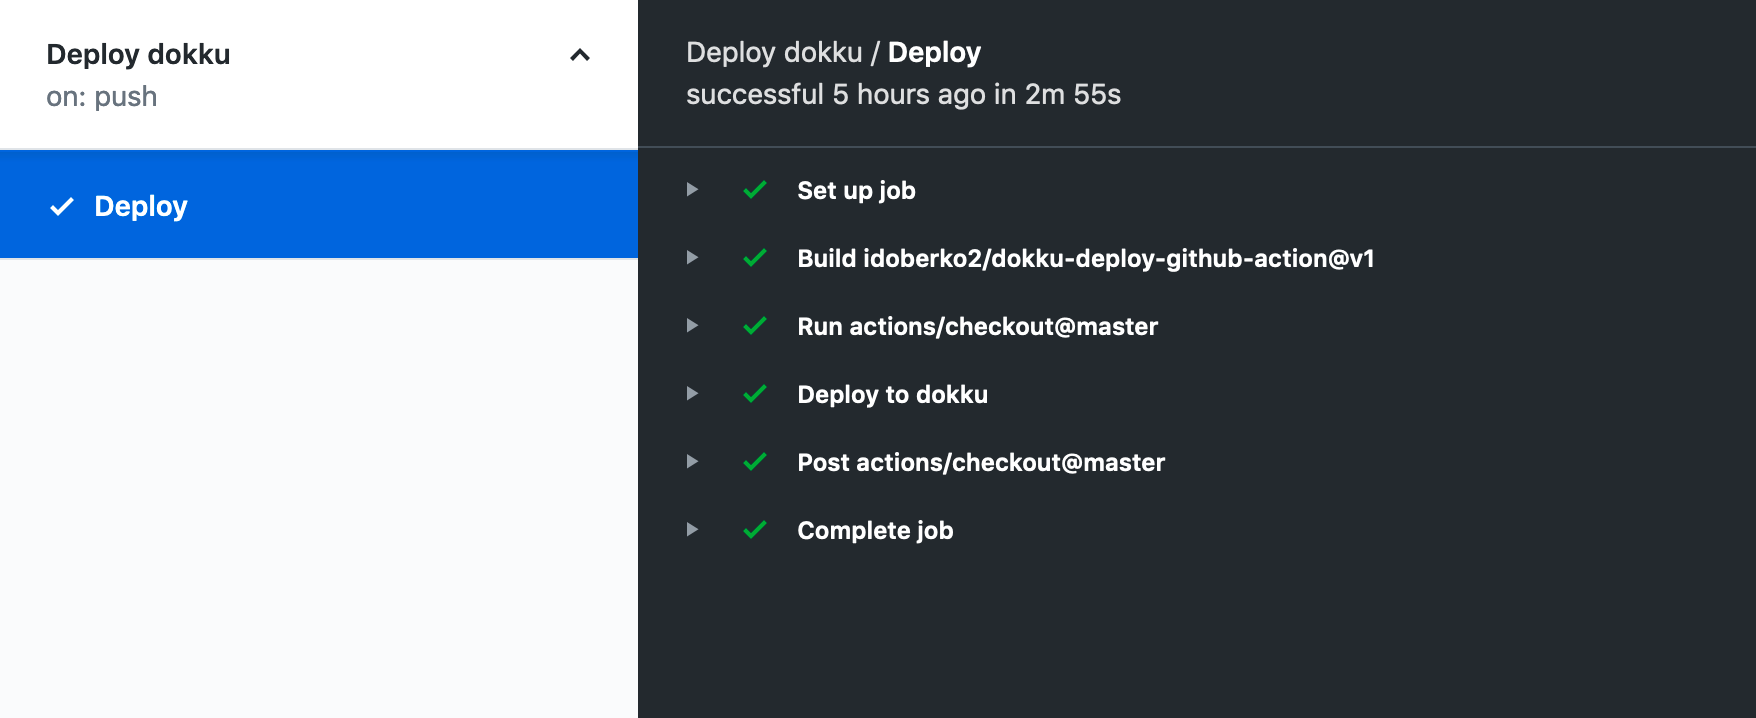 Successful deployment to Dokku using GitHub actions